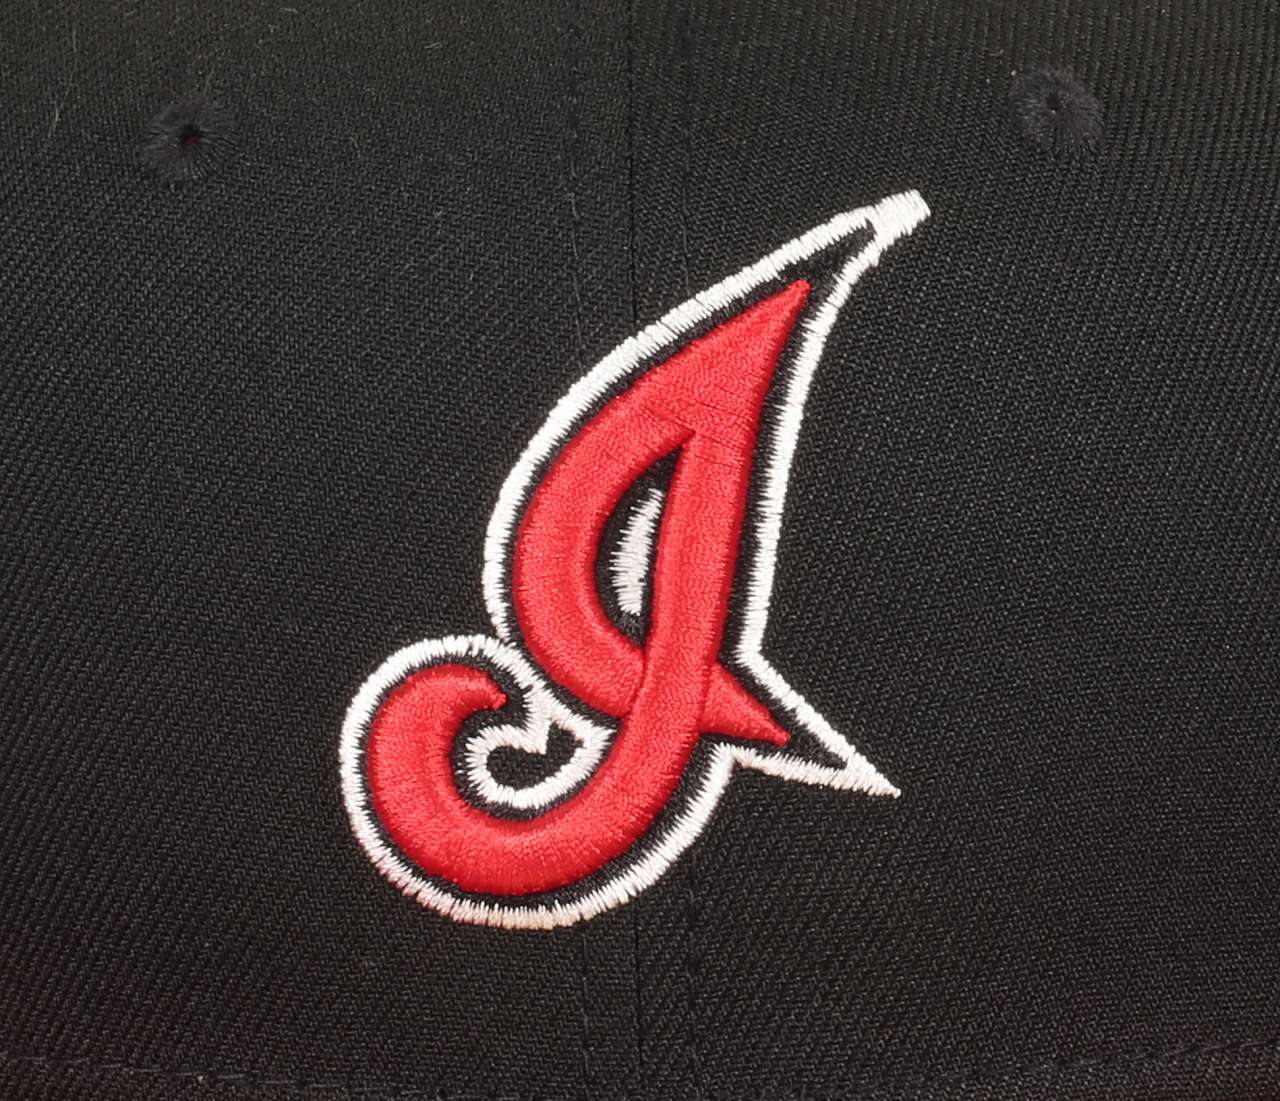 Cleveland Indians MLB Jacobs Field 10th Anniversary Sidepatch Black Scarlet 59Fifty Basecap New Era